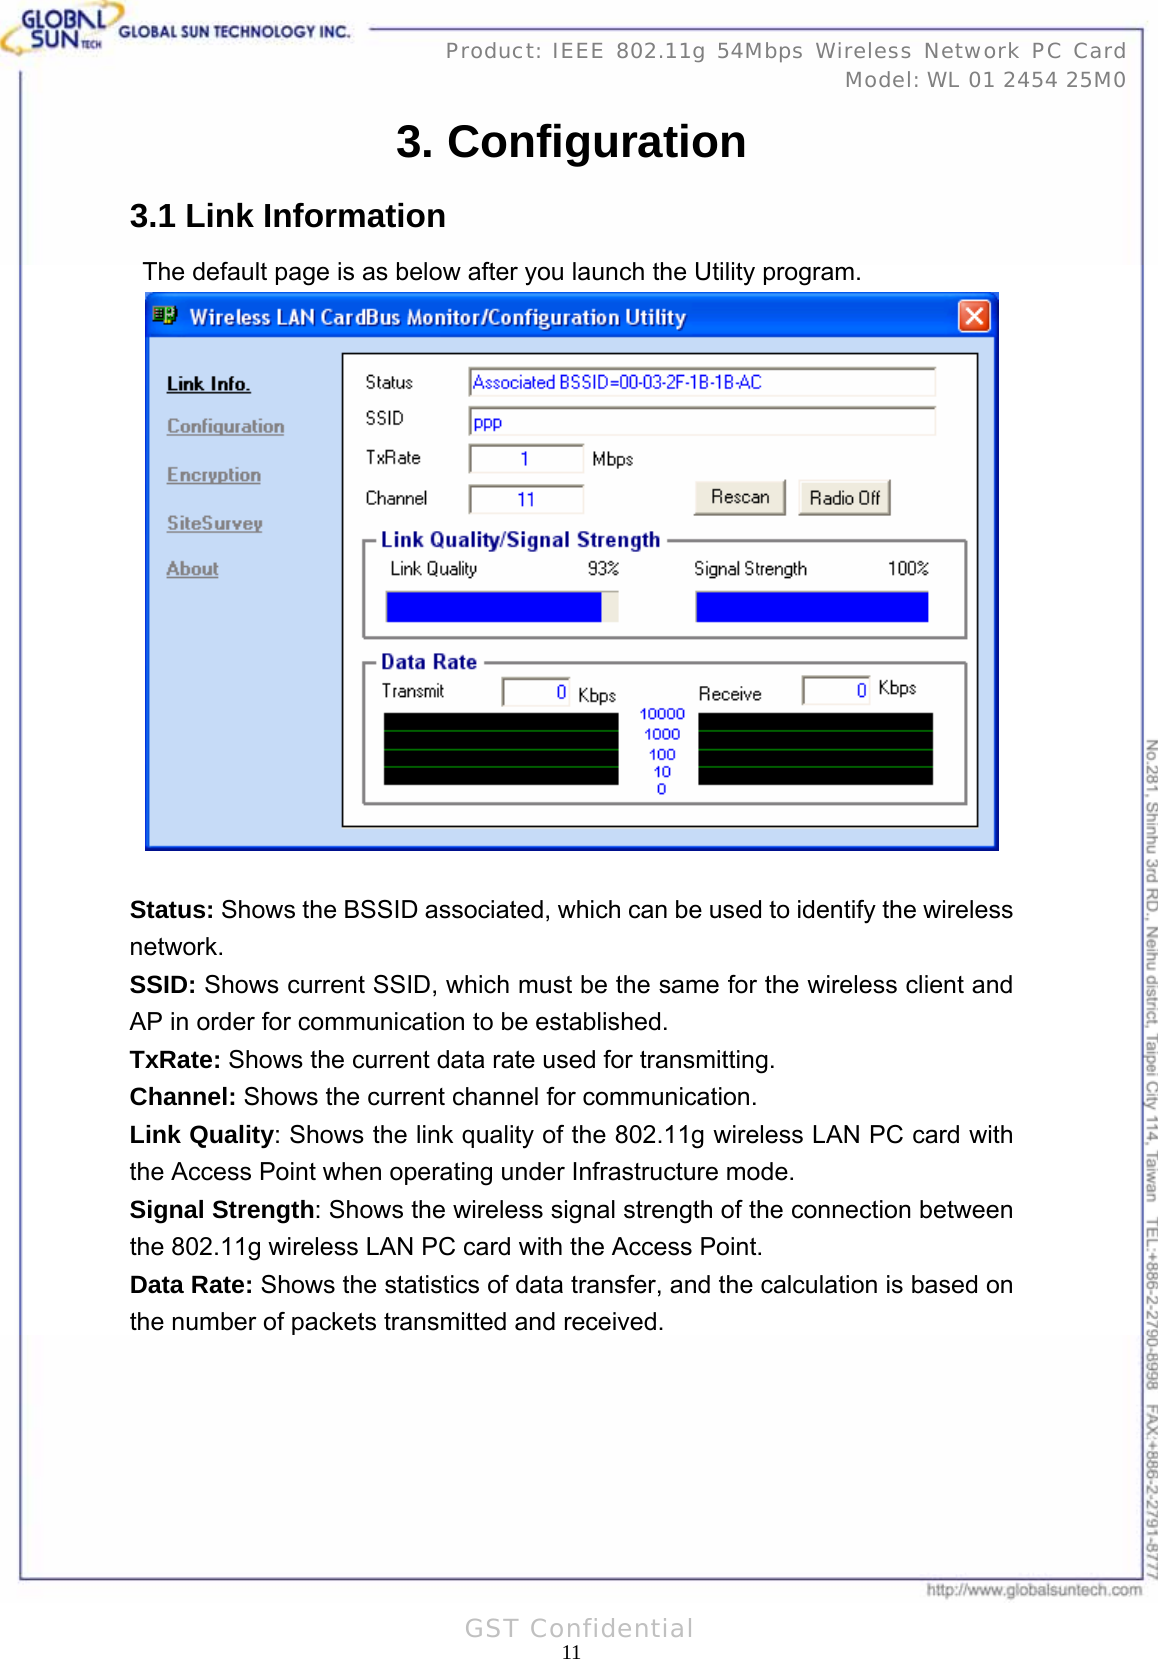   11Product: IEEE 802.11g 54Mbps Wireless Network PC Card Model: WL 01 2454 25M0 GST Confidential 3. Configuration 3.1 Link Information The default page is as below after you launch the Utility program.   Status: Shows the BSSID associated, which can be used to identify the wireless network. SSID: Shows current SSID, which must be the same for the wireless client and AP in order for communication to be established. TxRate: Shows the current data rate used for transmitting. Channel: Shows the current channel for communication. Link Quality: Shows the link quality of the 802.11g wireless LAN PC card with the Access Point when operating under Infrastructure mode. Signal Strength: Shows the wireless signal strength of the connection between the 802.11g wireless LAN PC card with the Access Point. Data Rate: Shows the statistics of data transfer, and the calculation is based on the number of packets transmitted and received.  